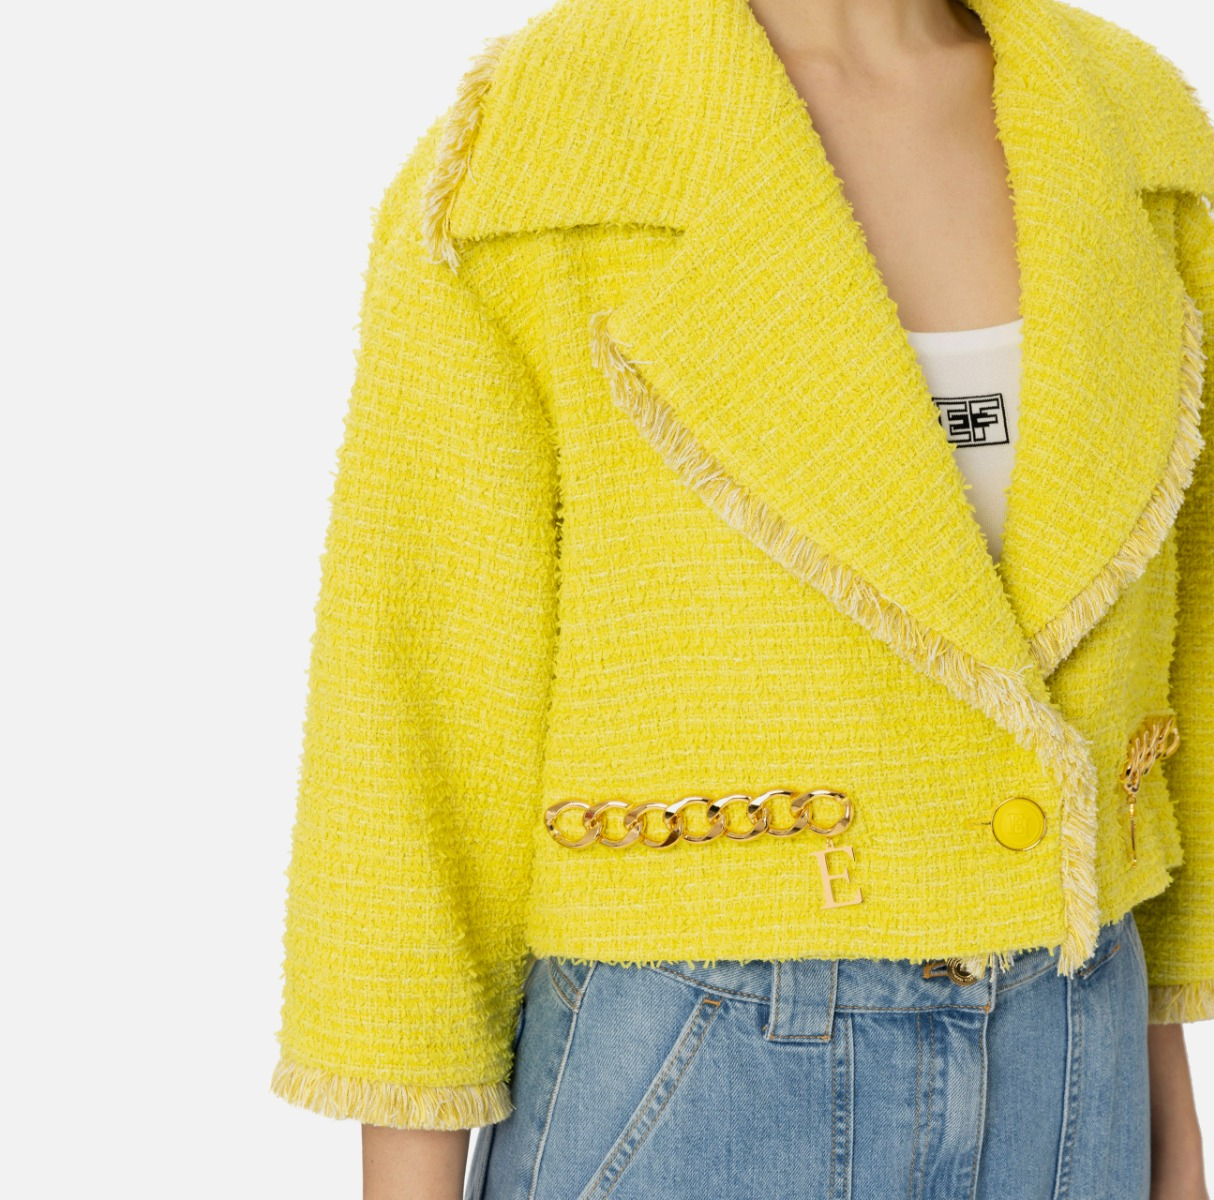 Tweed cropped jacket with chain - Elisabetta Franchi